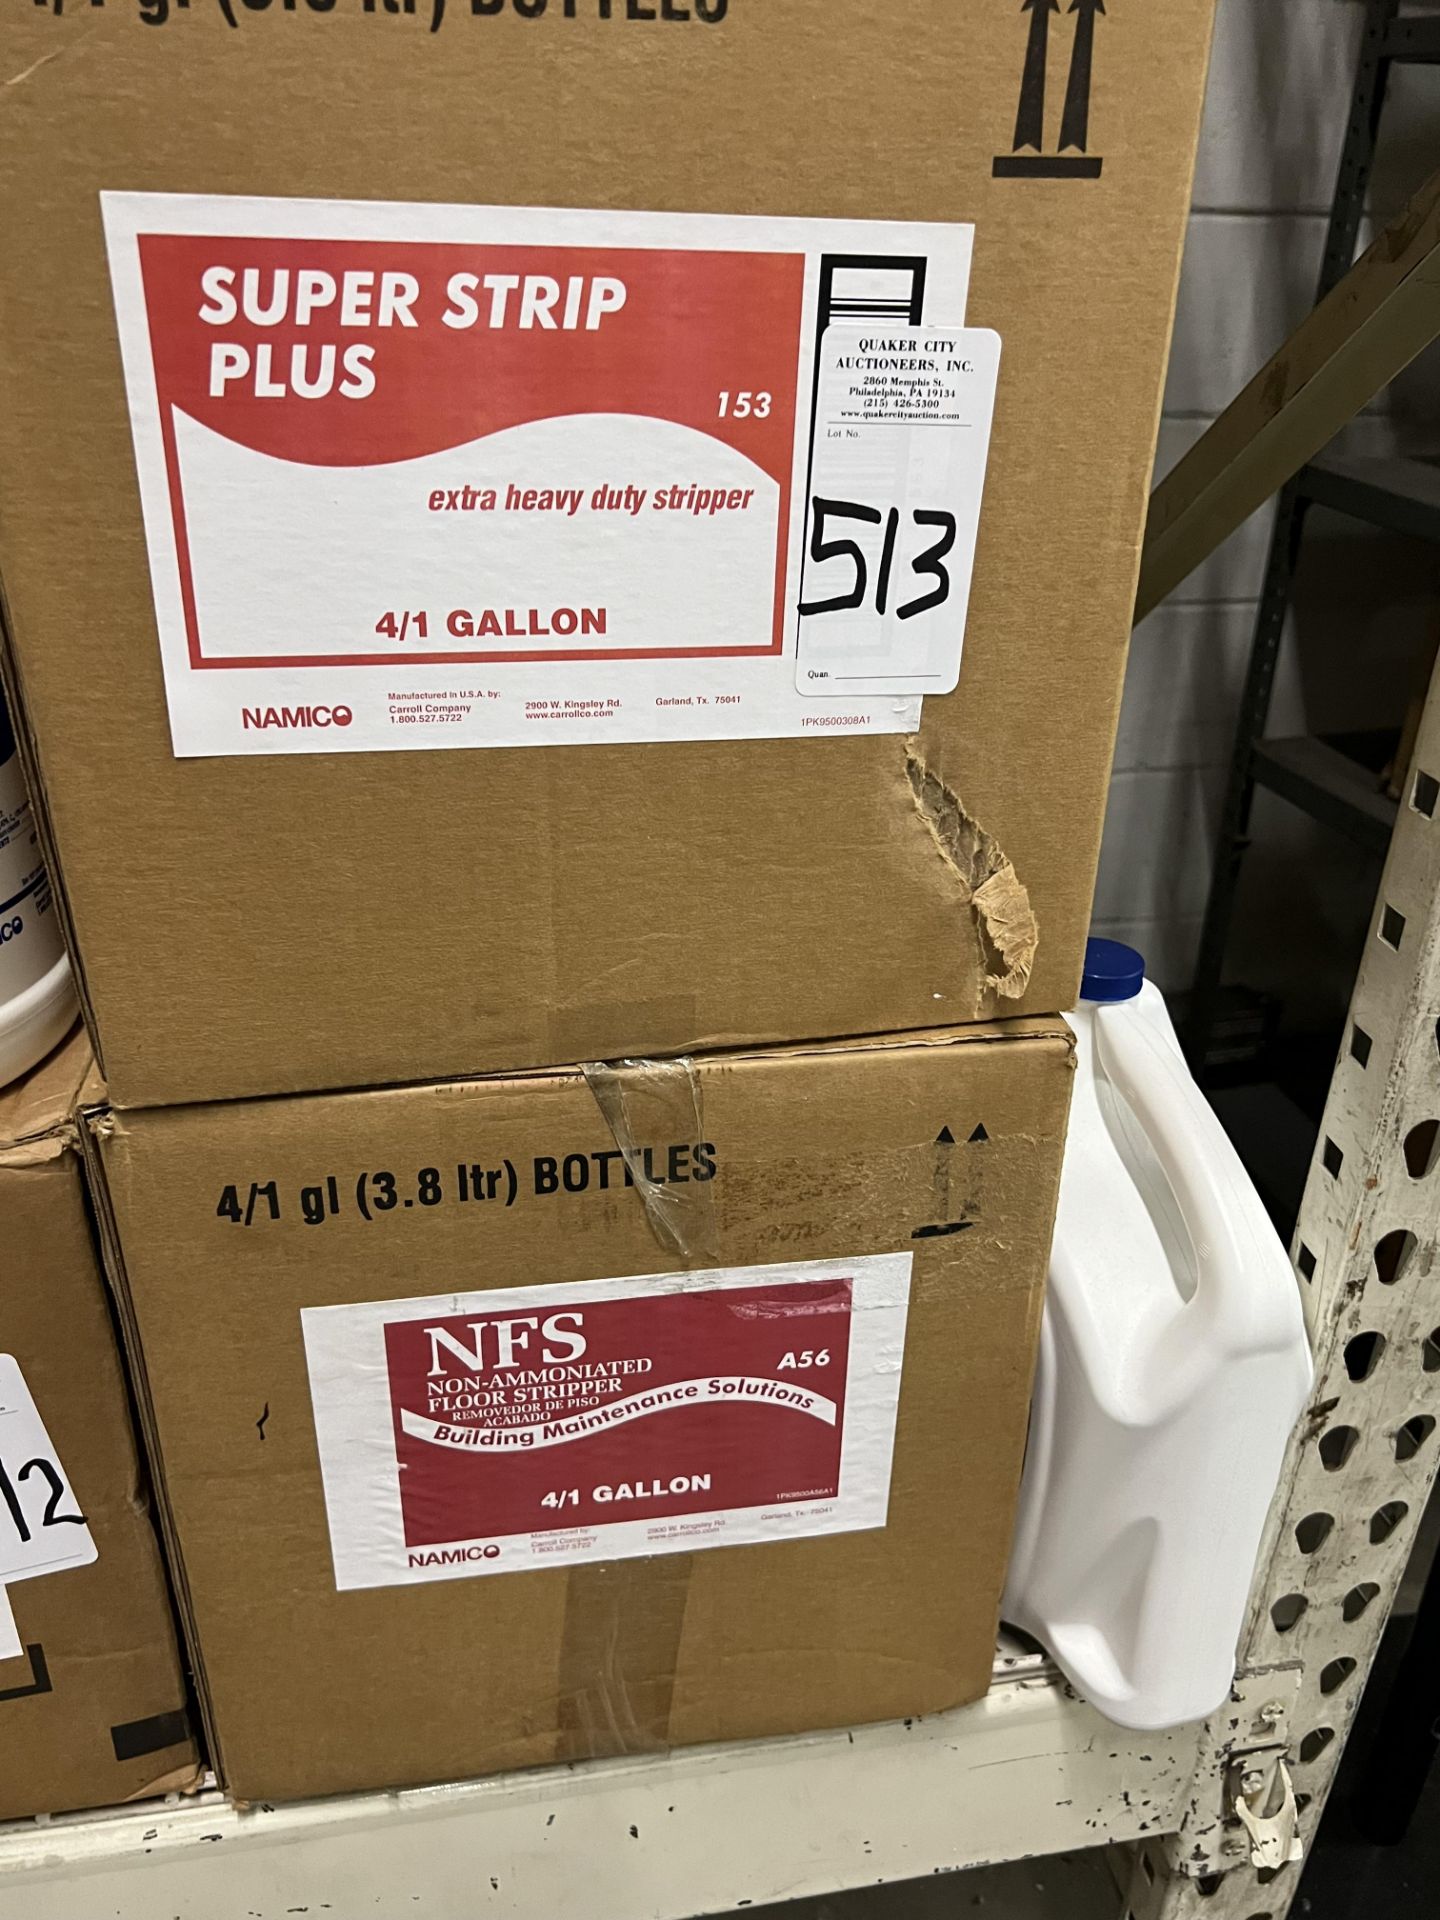 (4) GALLONS OF NAMICO NO. 153 SUPERSTRIP PLUS AND (4) GALLONS OF A55 NON-AMMONITED FLOOR STRIPPER AN